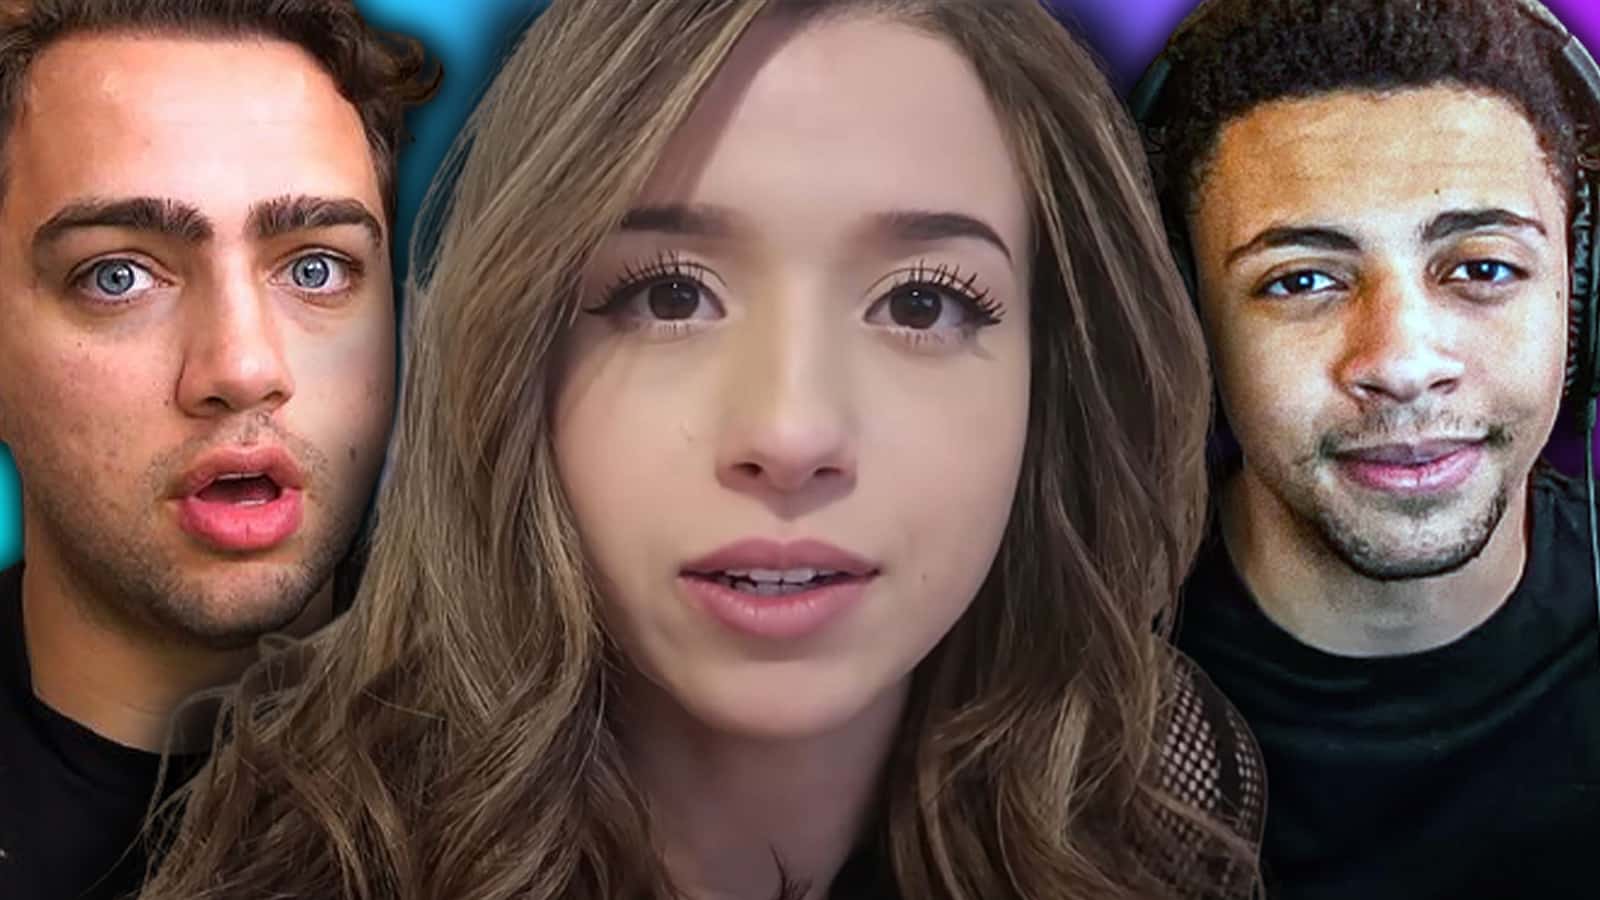 Twitch streamers support Pokimane after sexist hate raid